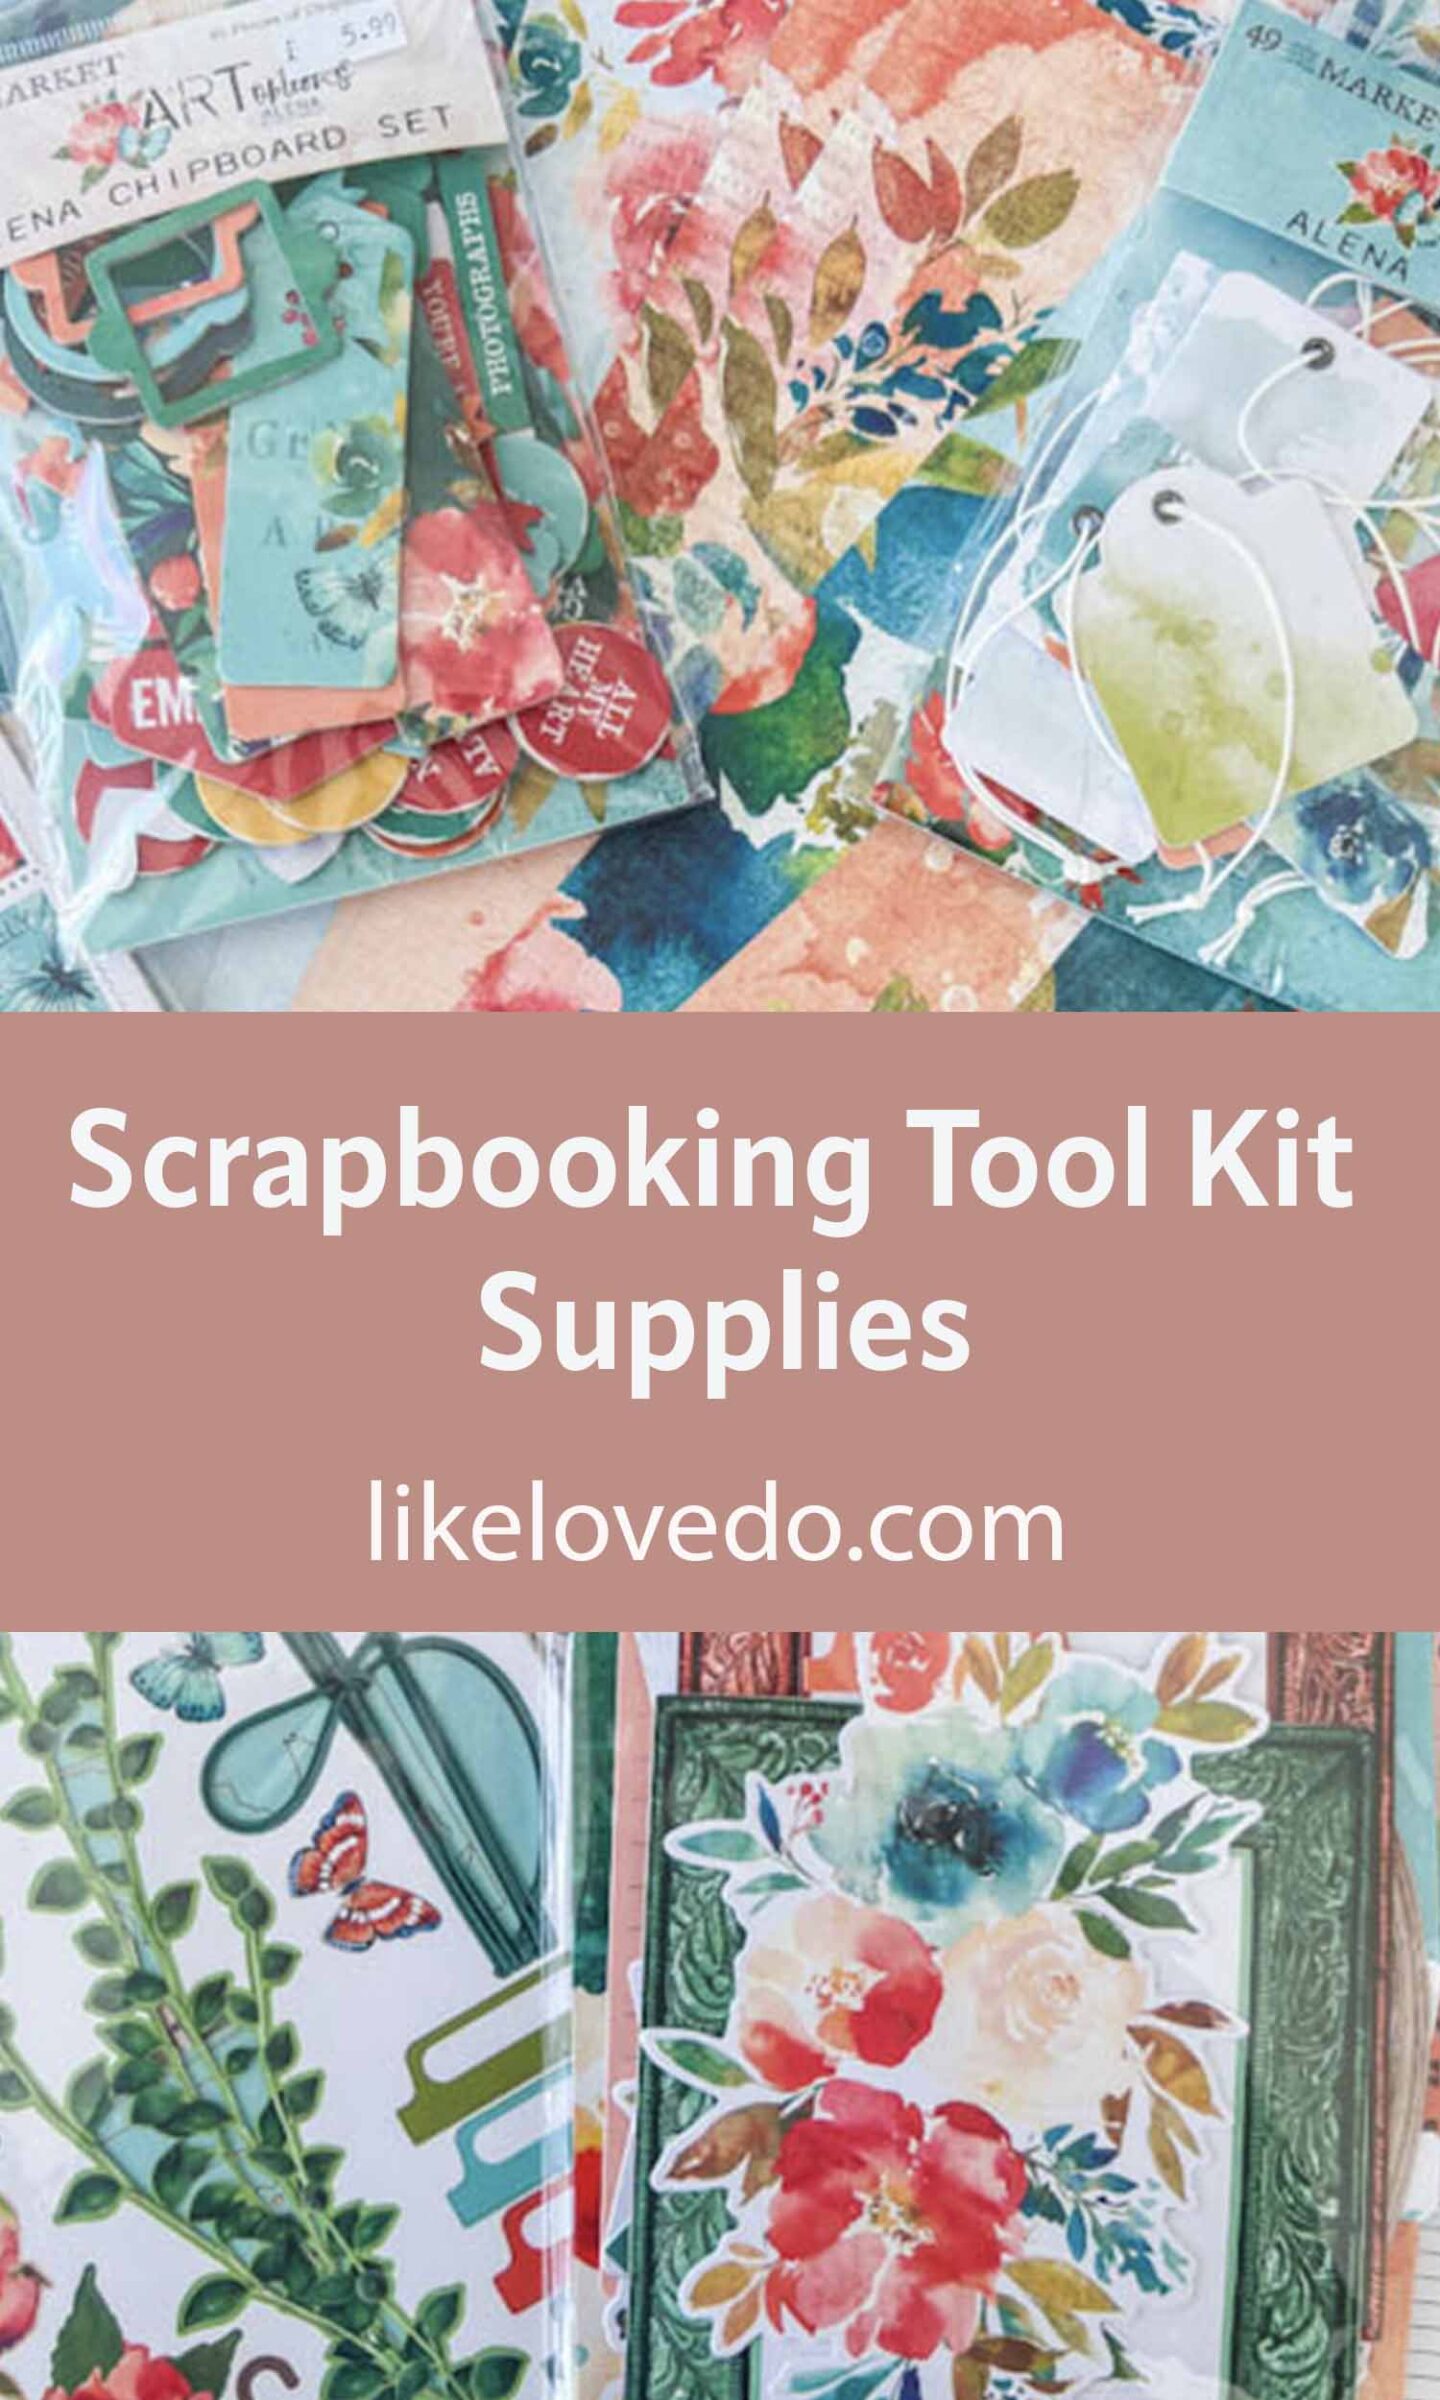 Scrapbooking Tools And supplies for scrapbooking